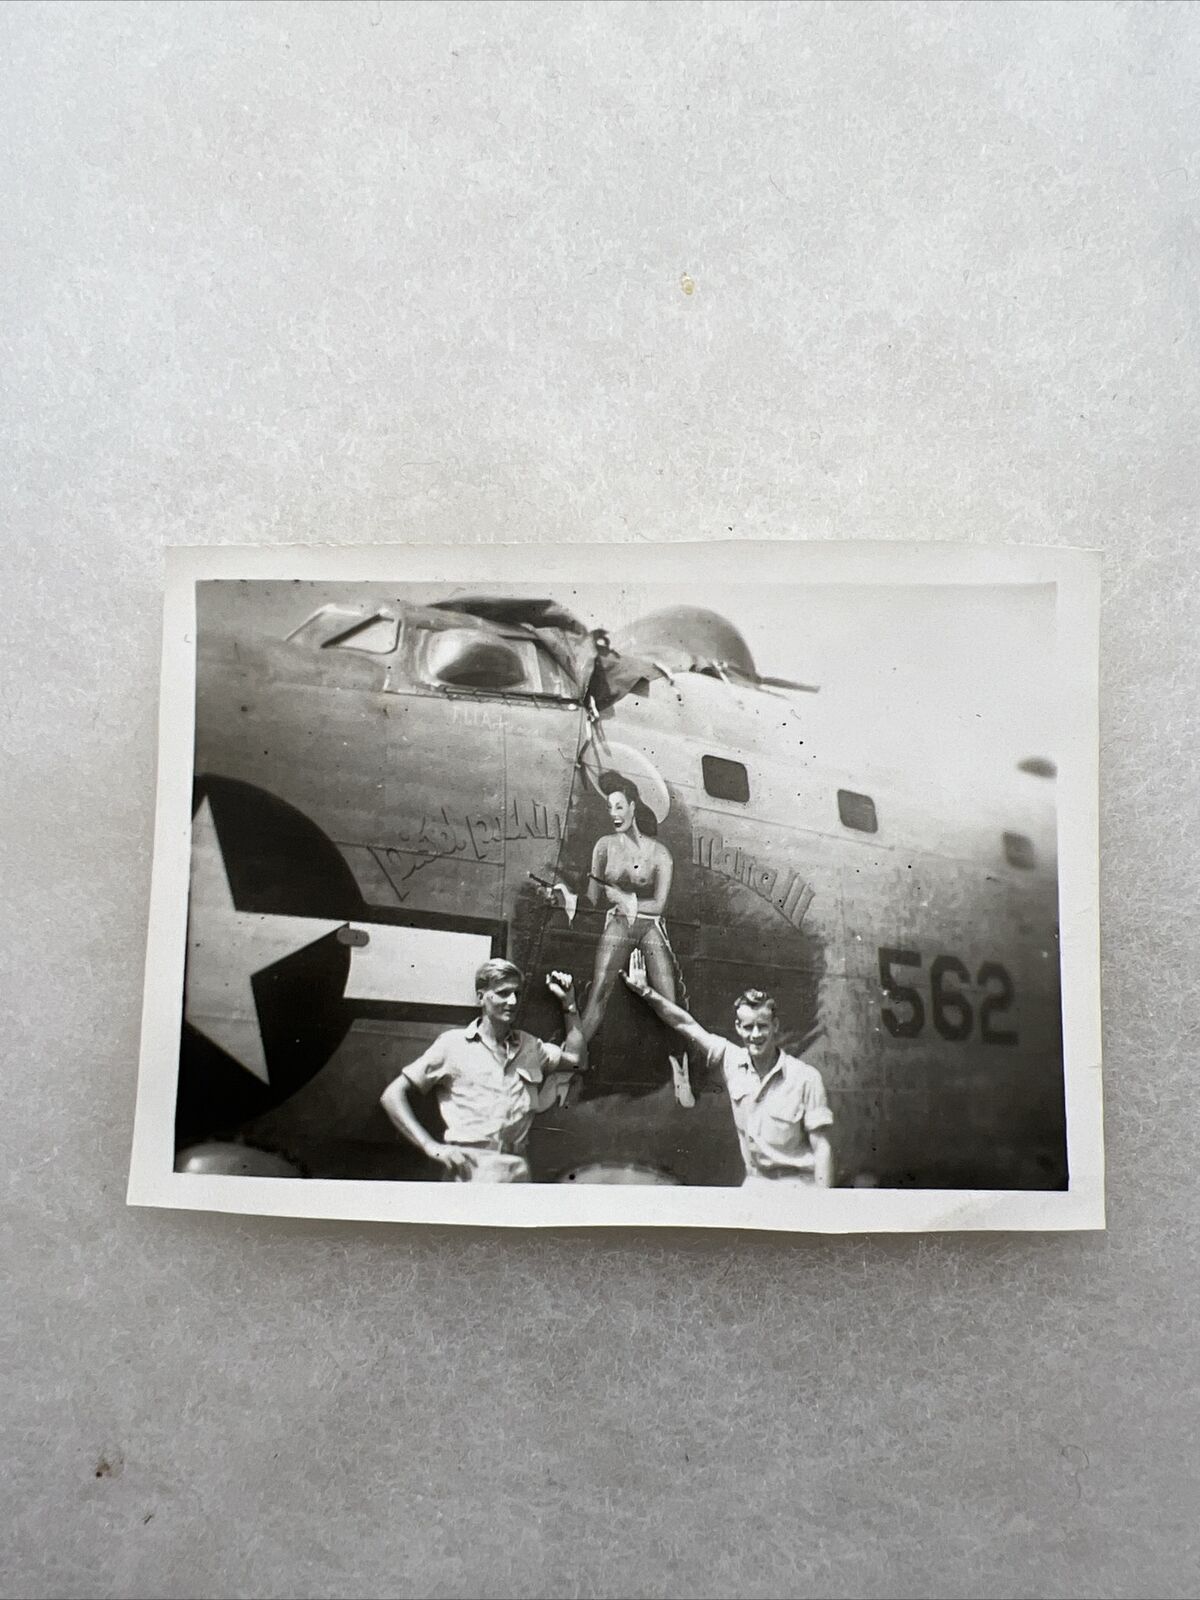 WW2 US Army Air Corps Nose Art “Pistol Packin Maria” Painted Plane Photo (V132